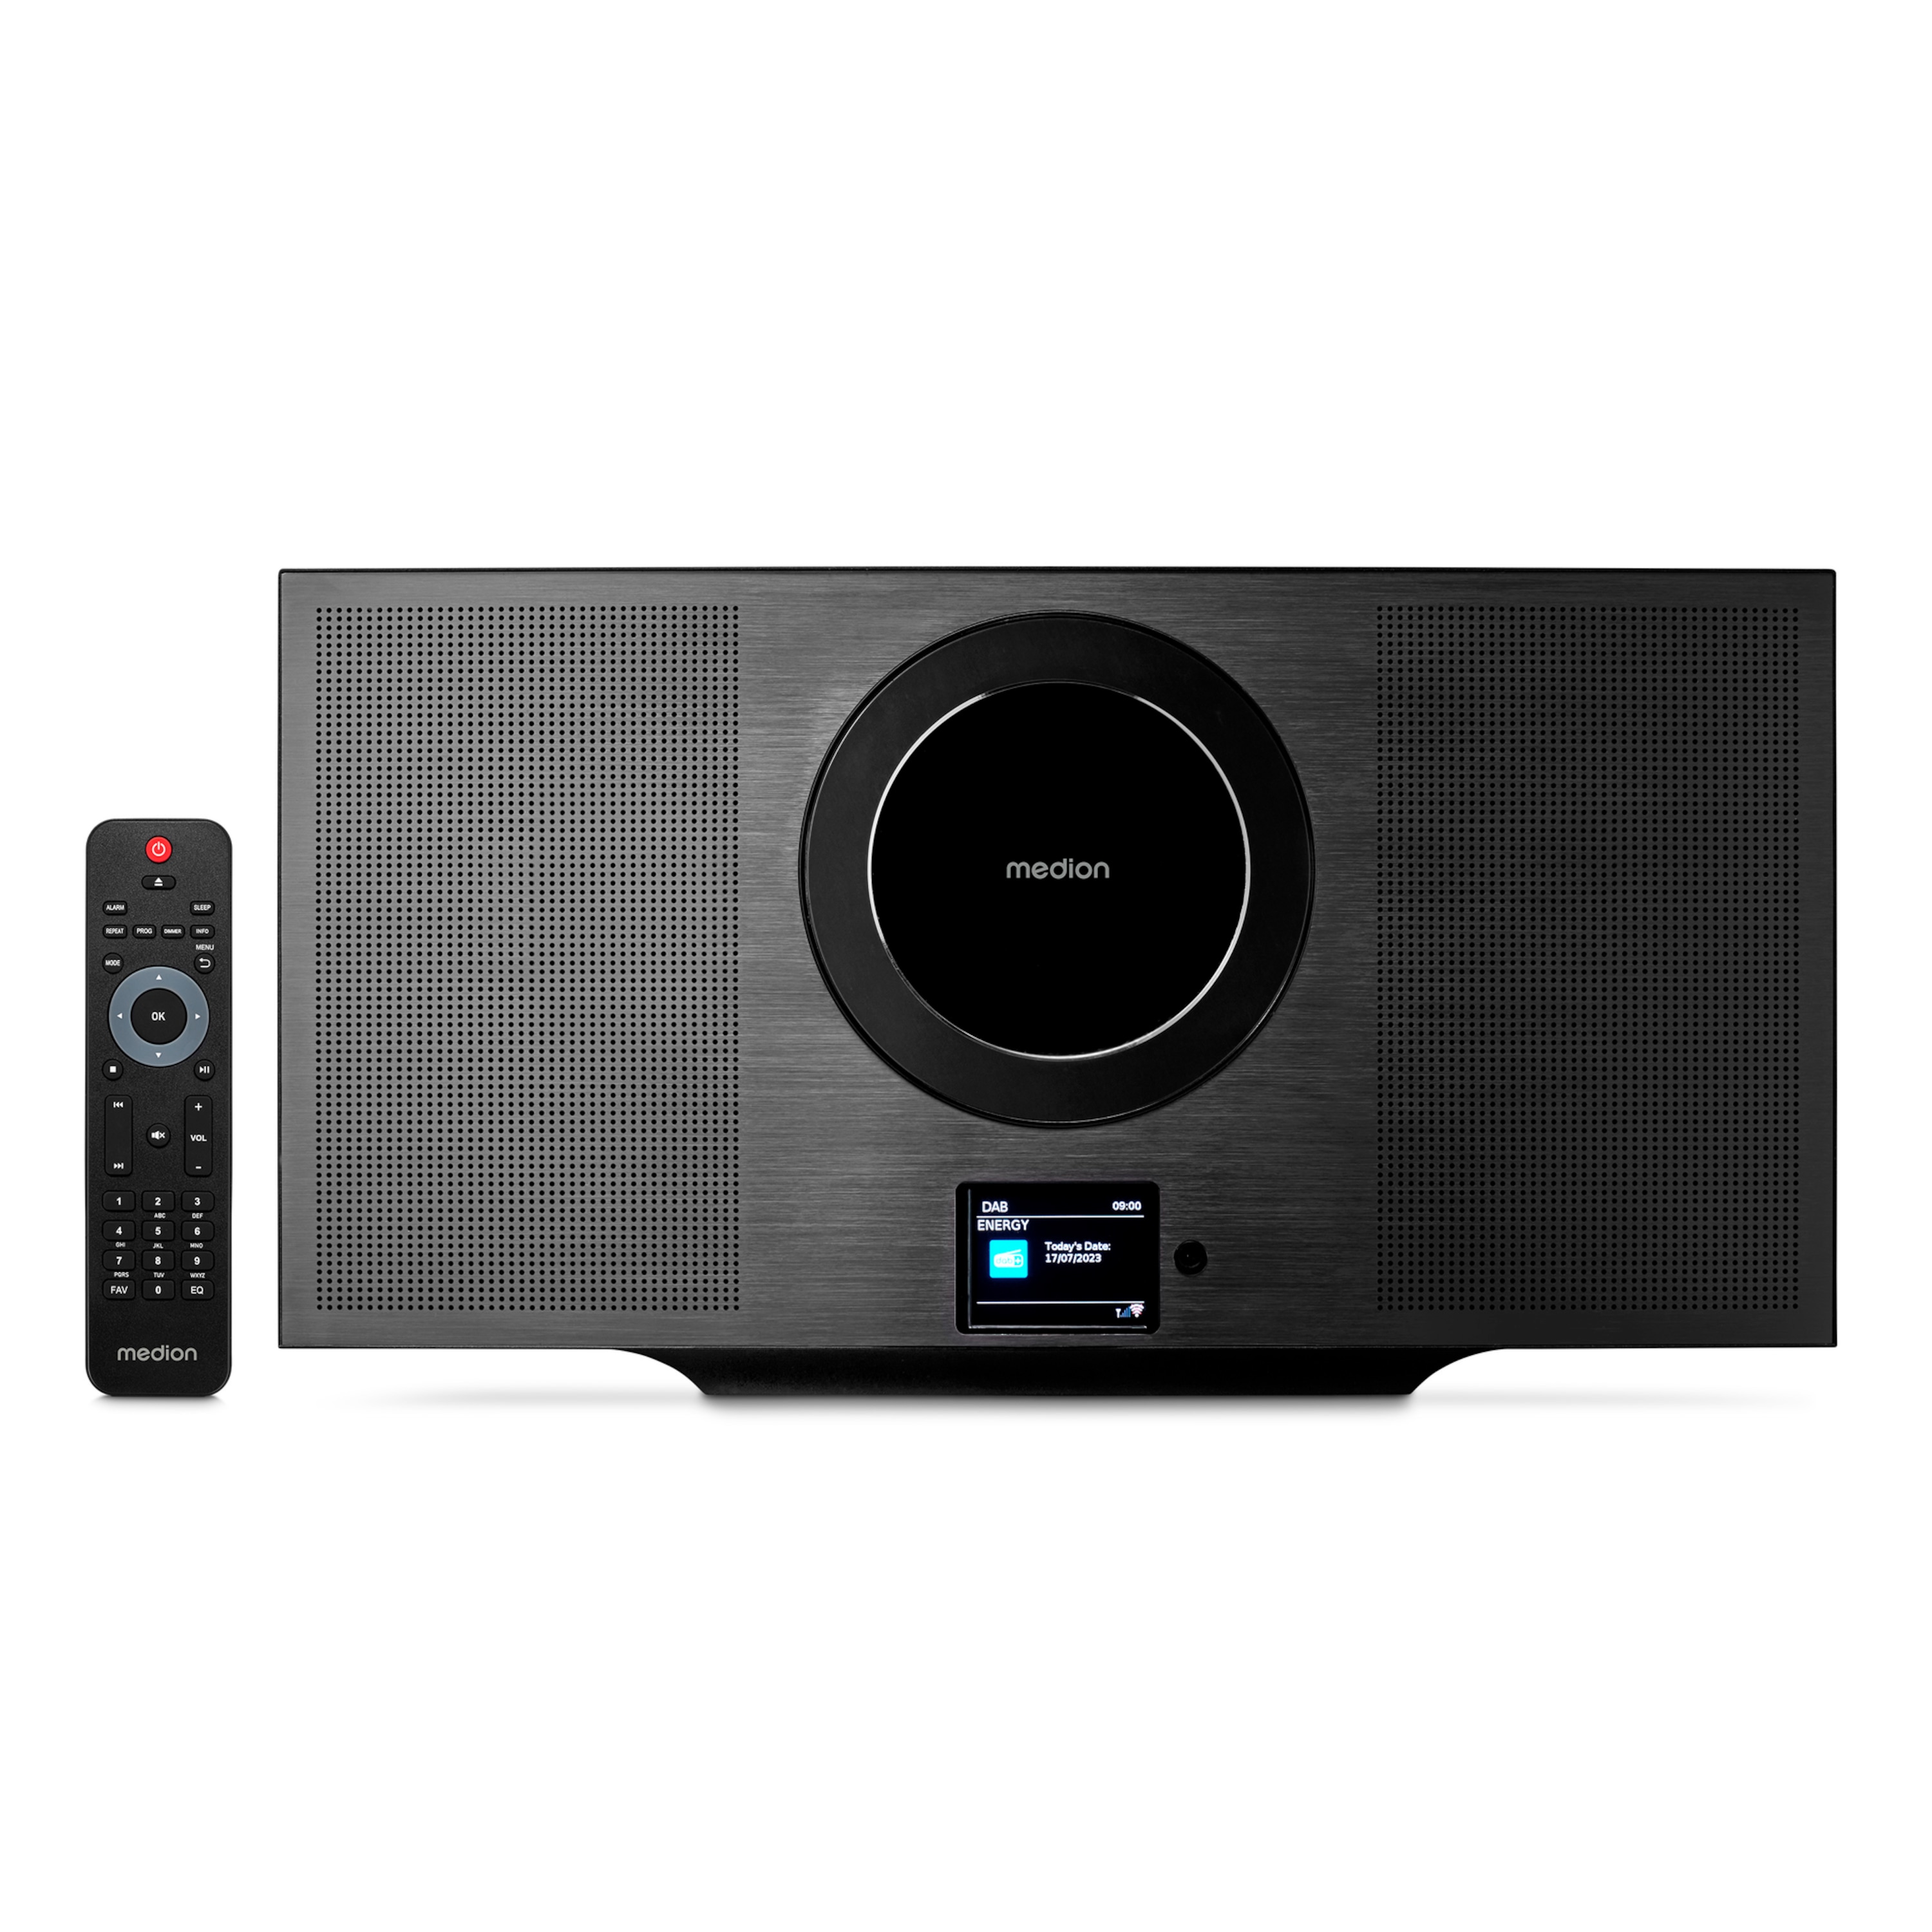 MEDION P66348 Vertikales All-in-One Audio System, 6,1 cm (2,4'') TFT-Farbdisplay, exklusives Design, Internet/DAB+/PLL-UKW Radio, CD/MP3-Player, Bluetooth®, Spotify®-Connect, 2 x 10 W RMS